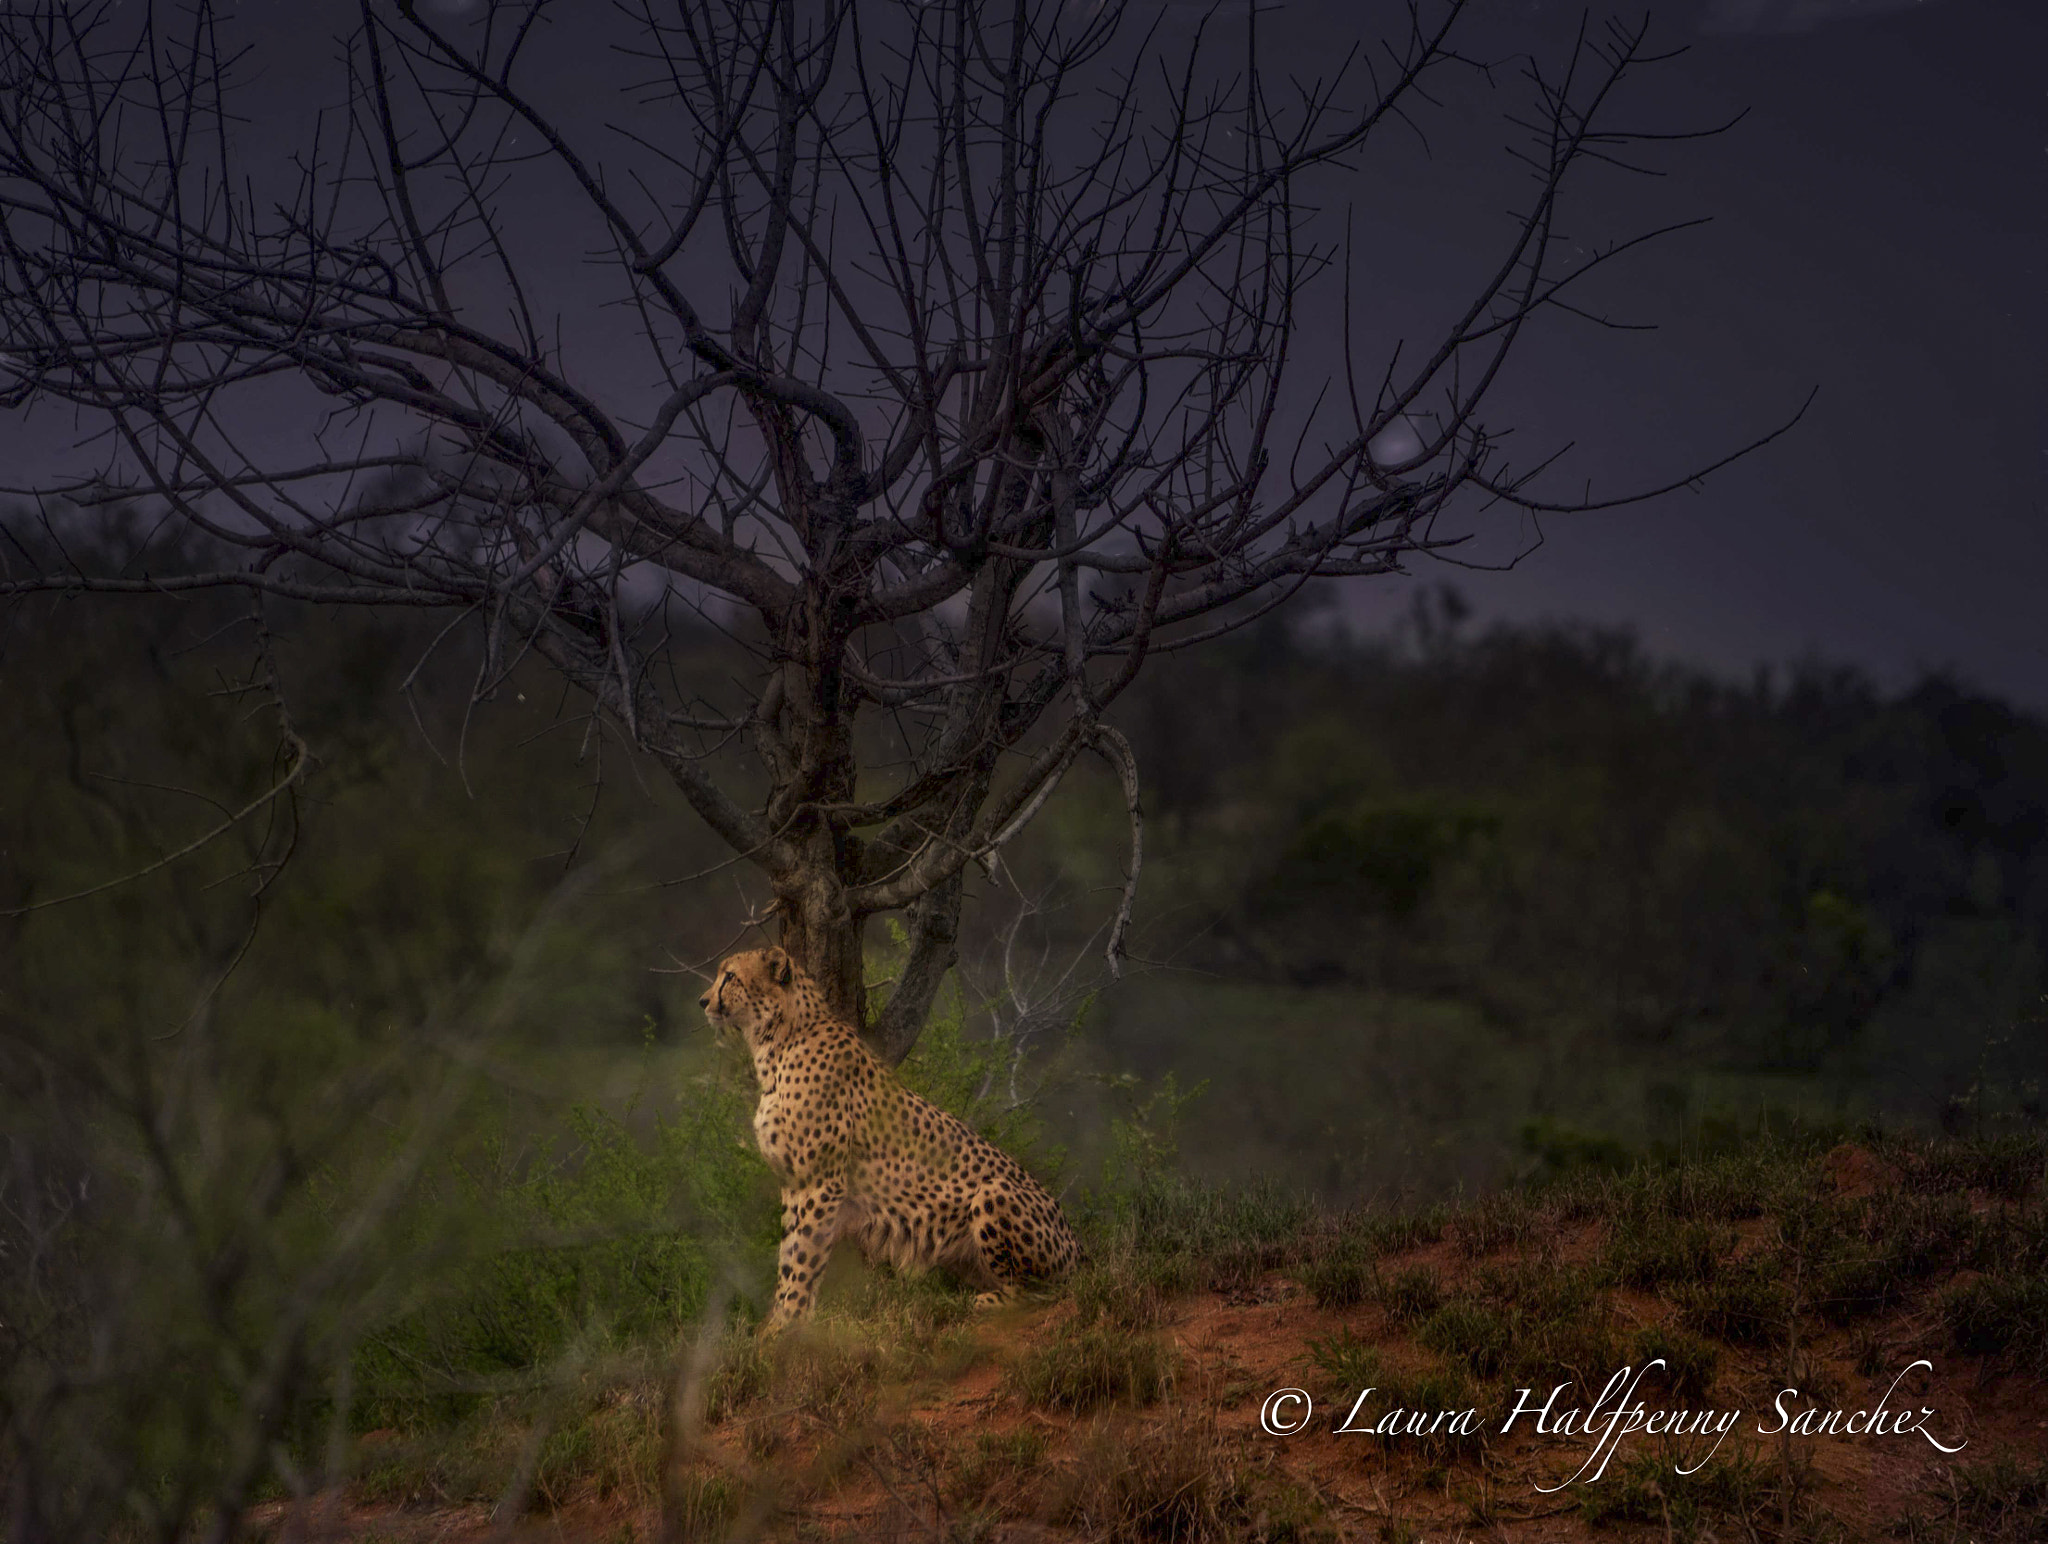 Cheetah by the tree